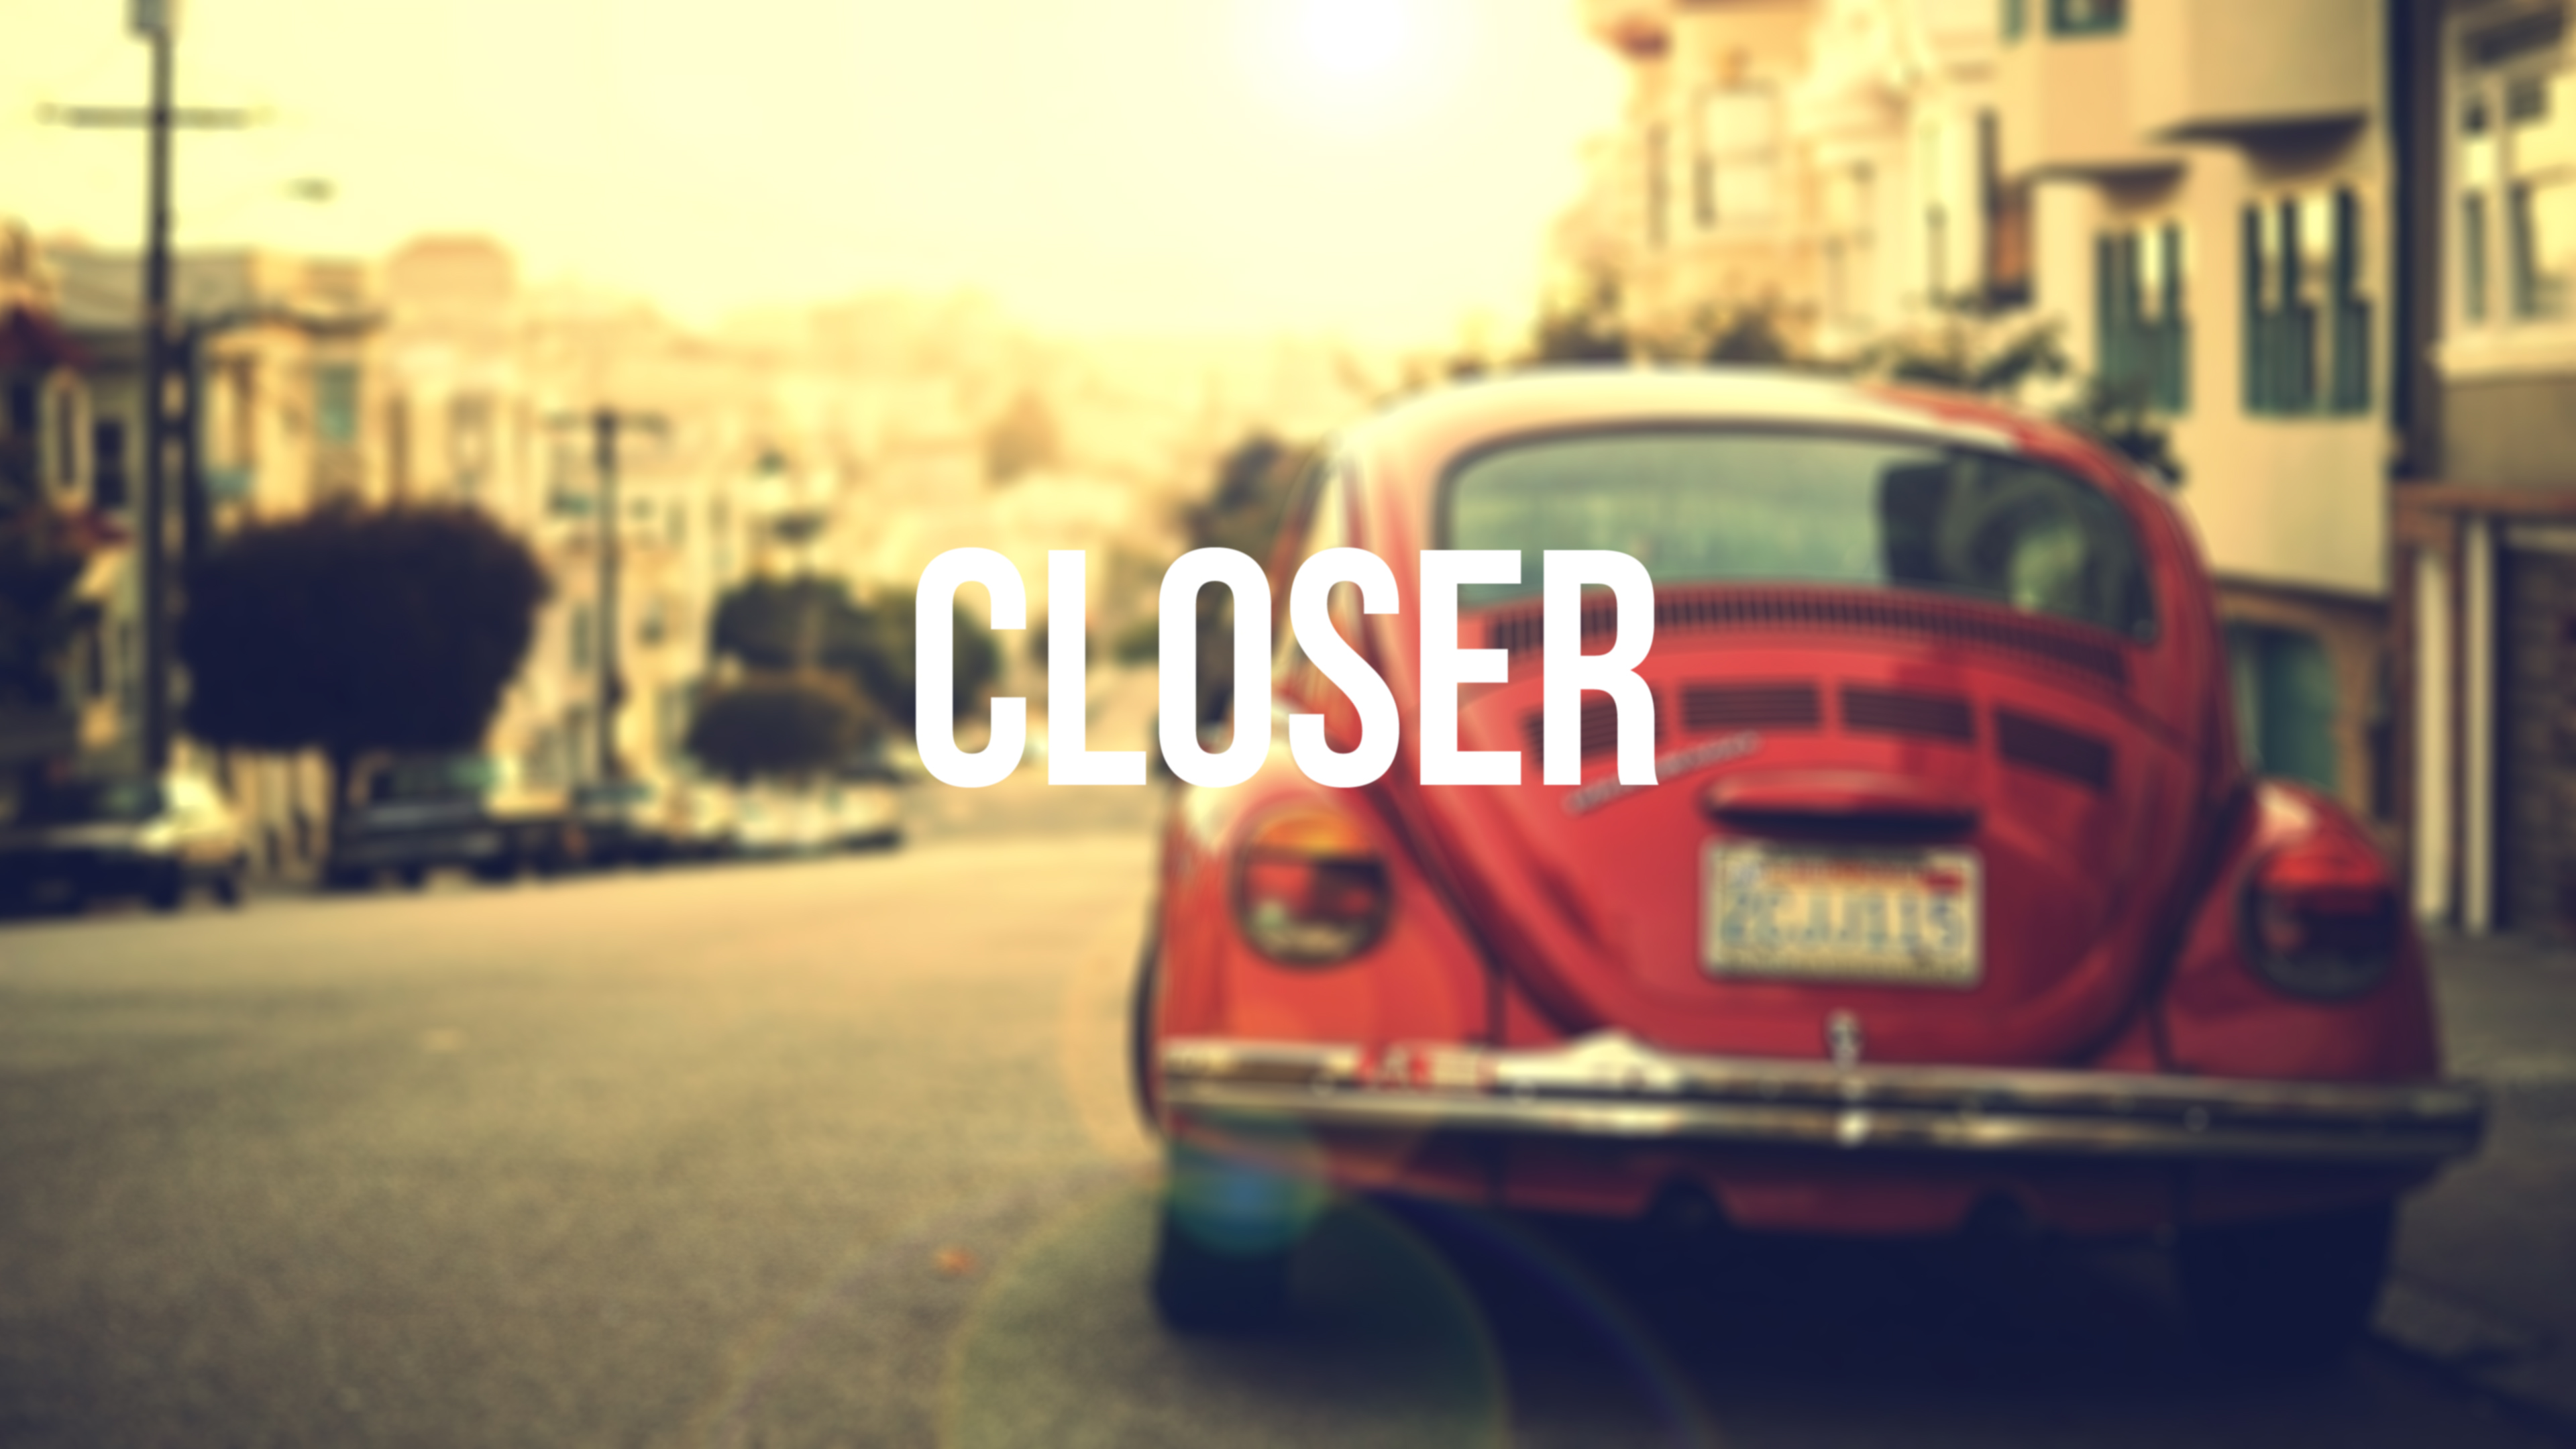 Vehicles Closer HD Wallpaper | Background Image